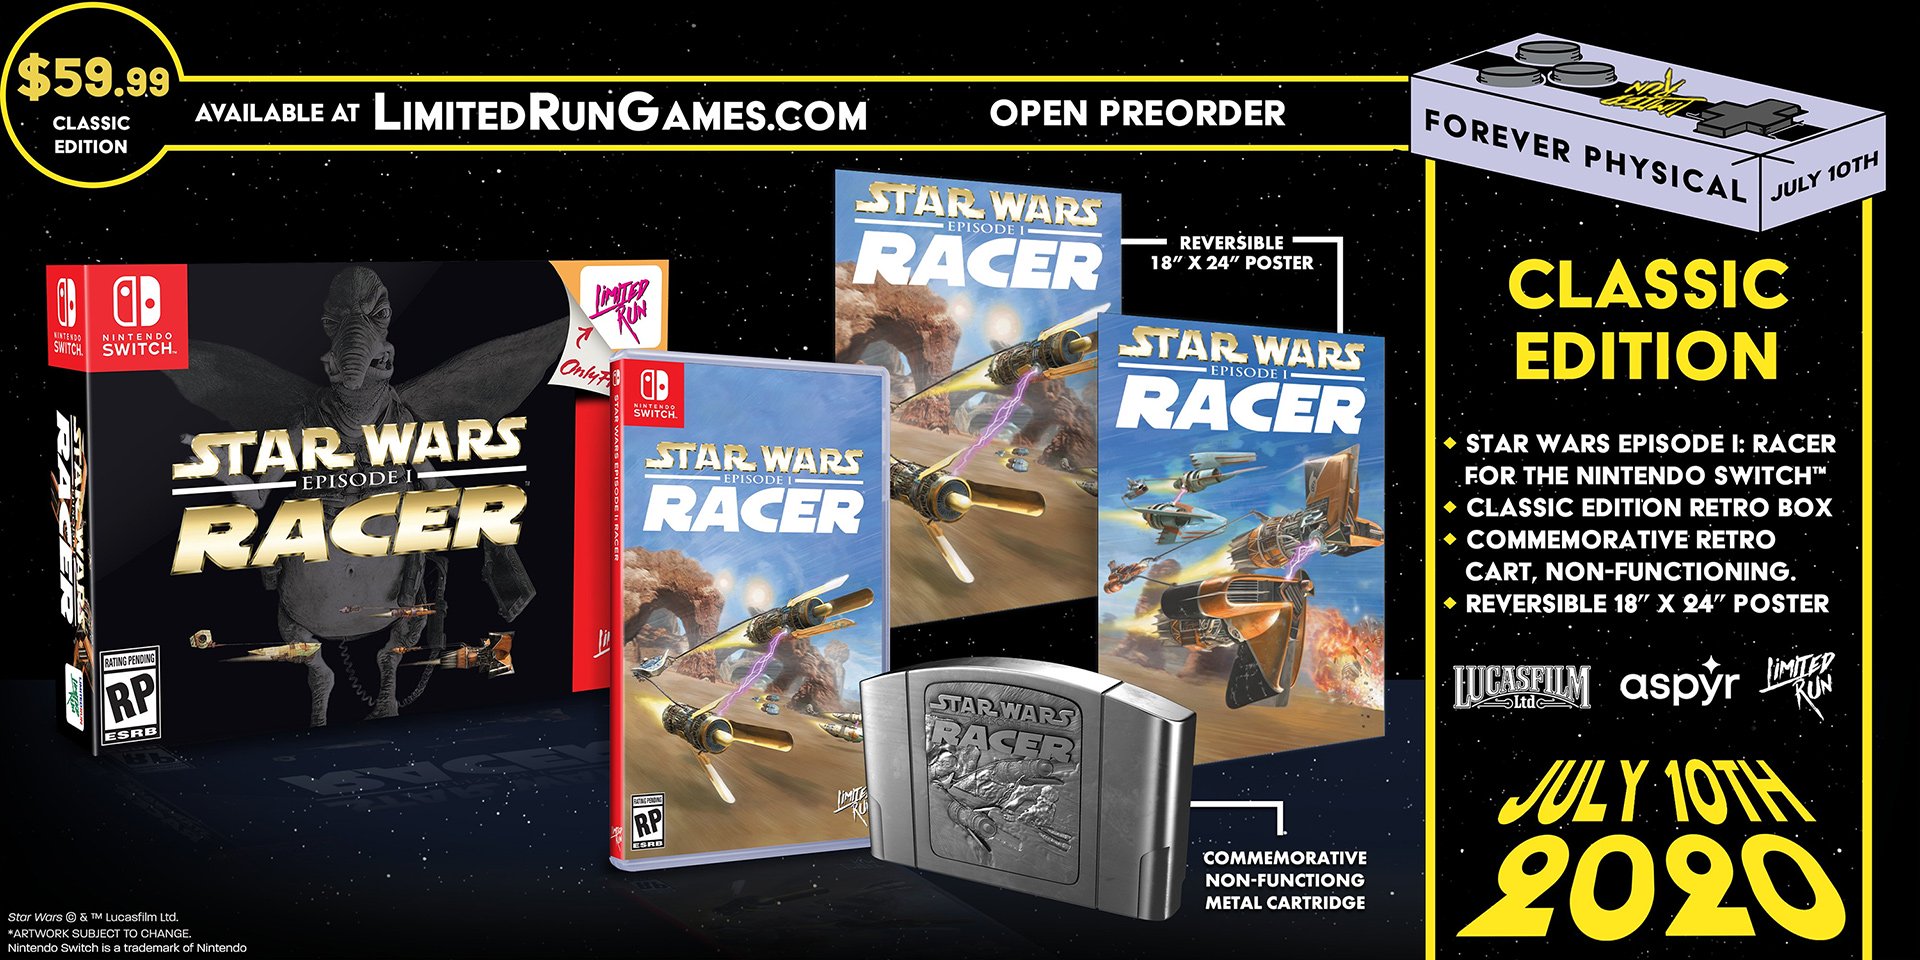 Star Wars Episode I: Racer Classic Edition Limited Run Games